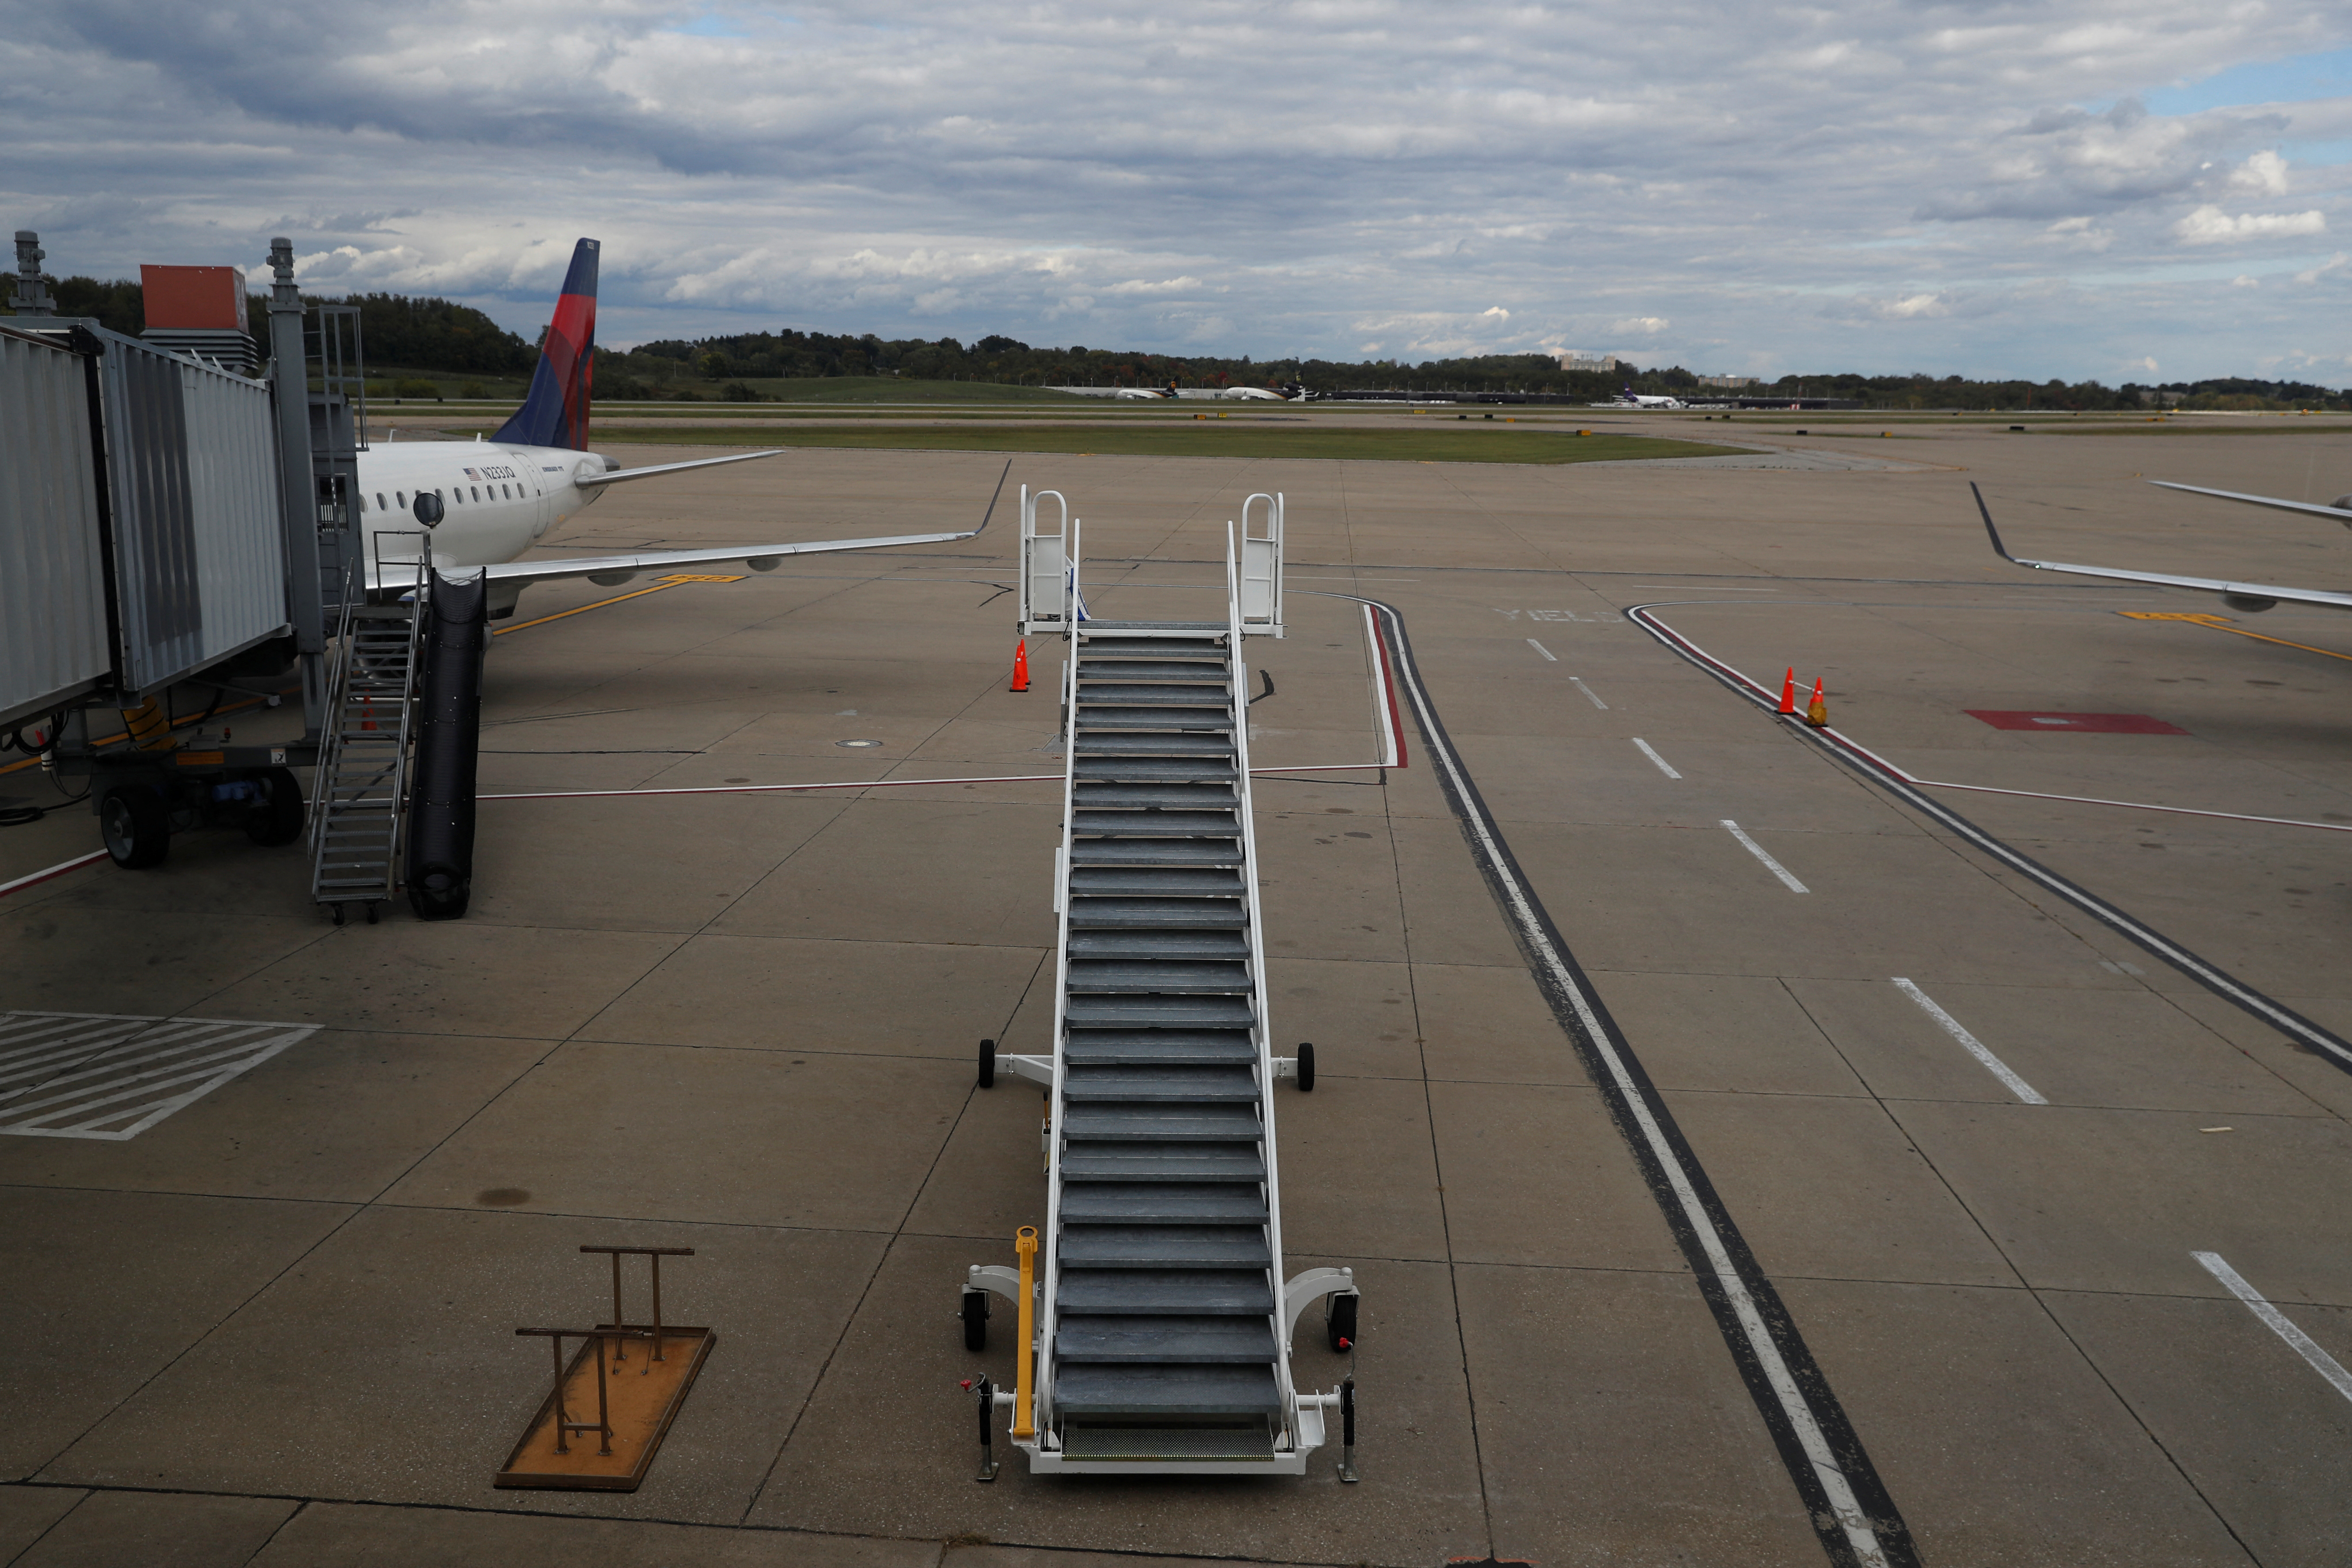 Stairs stand on a tarmac next to a Delta Air Lines plane at Pittsburgh International Airport in Pittsburgh, Pennsylvania, U.S., October 3, 2020. REUTERS/Shannon Stapleton